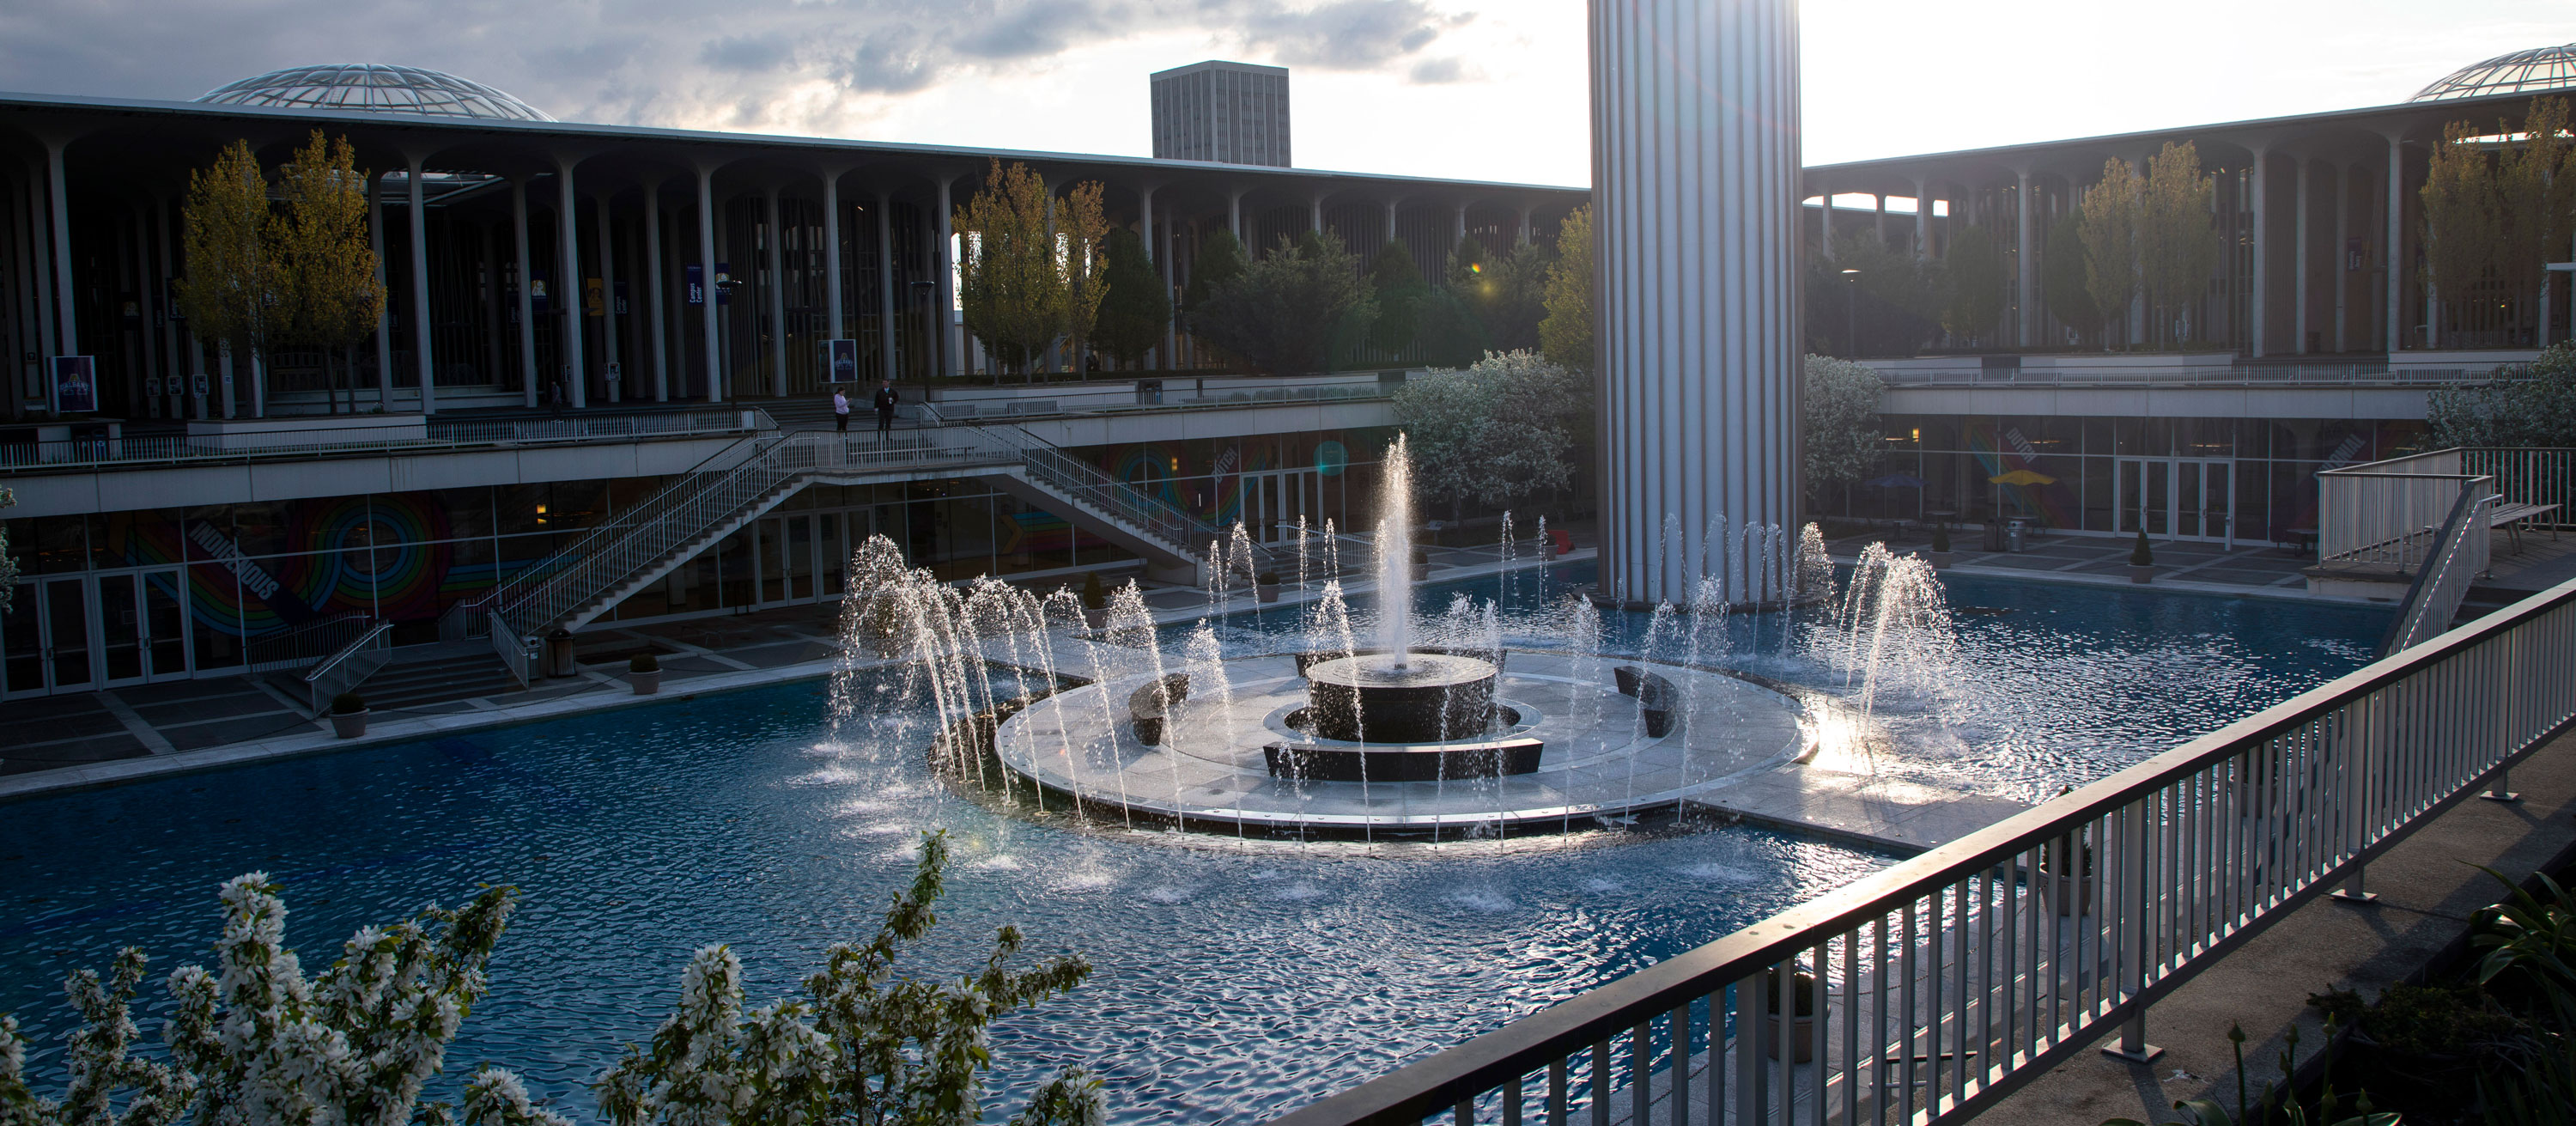 The UAlbany main fountain on the Academic Podium on the Uptown Campus just before sunset.